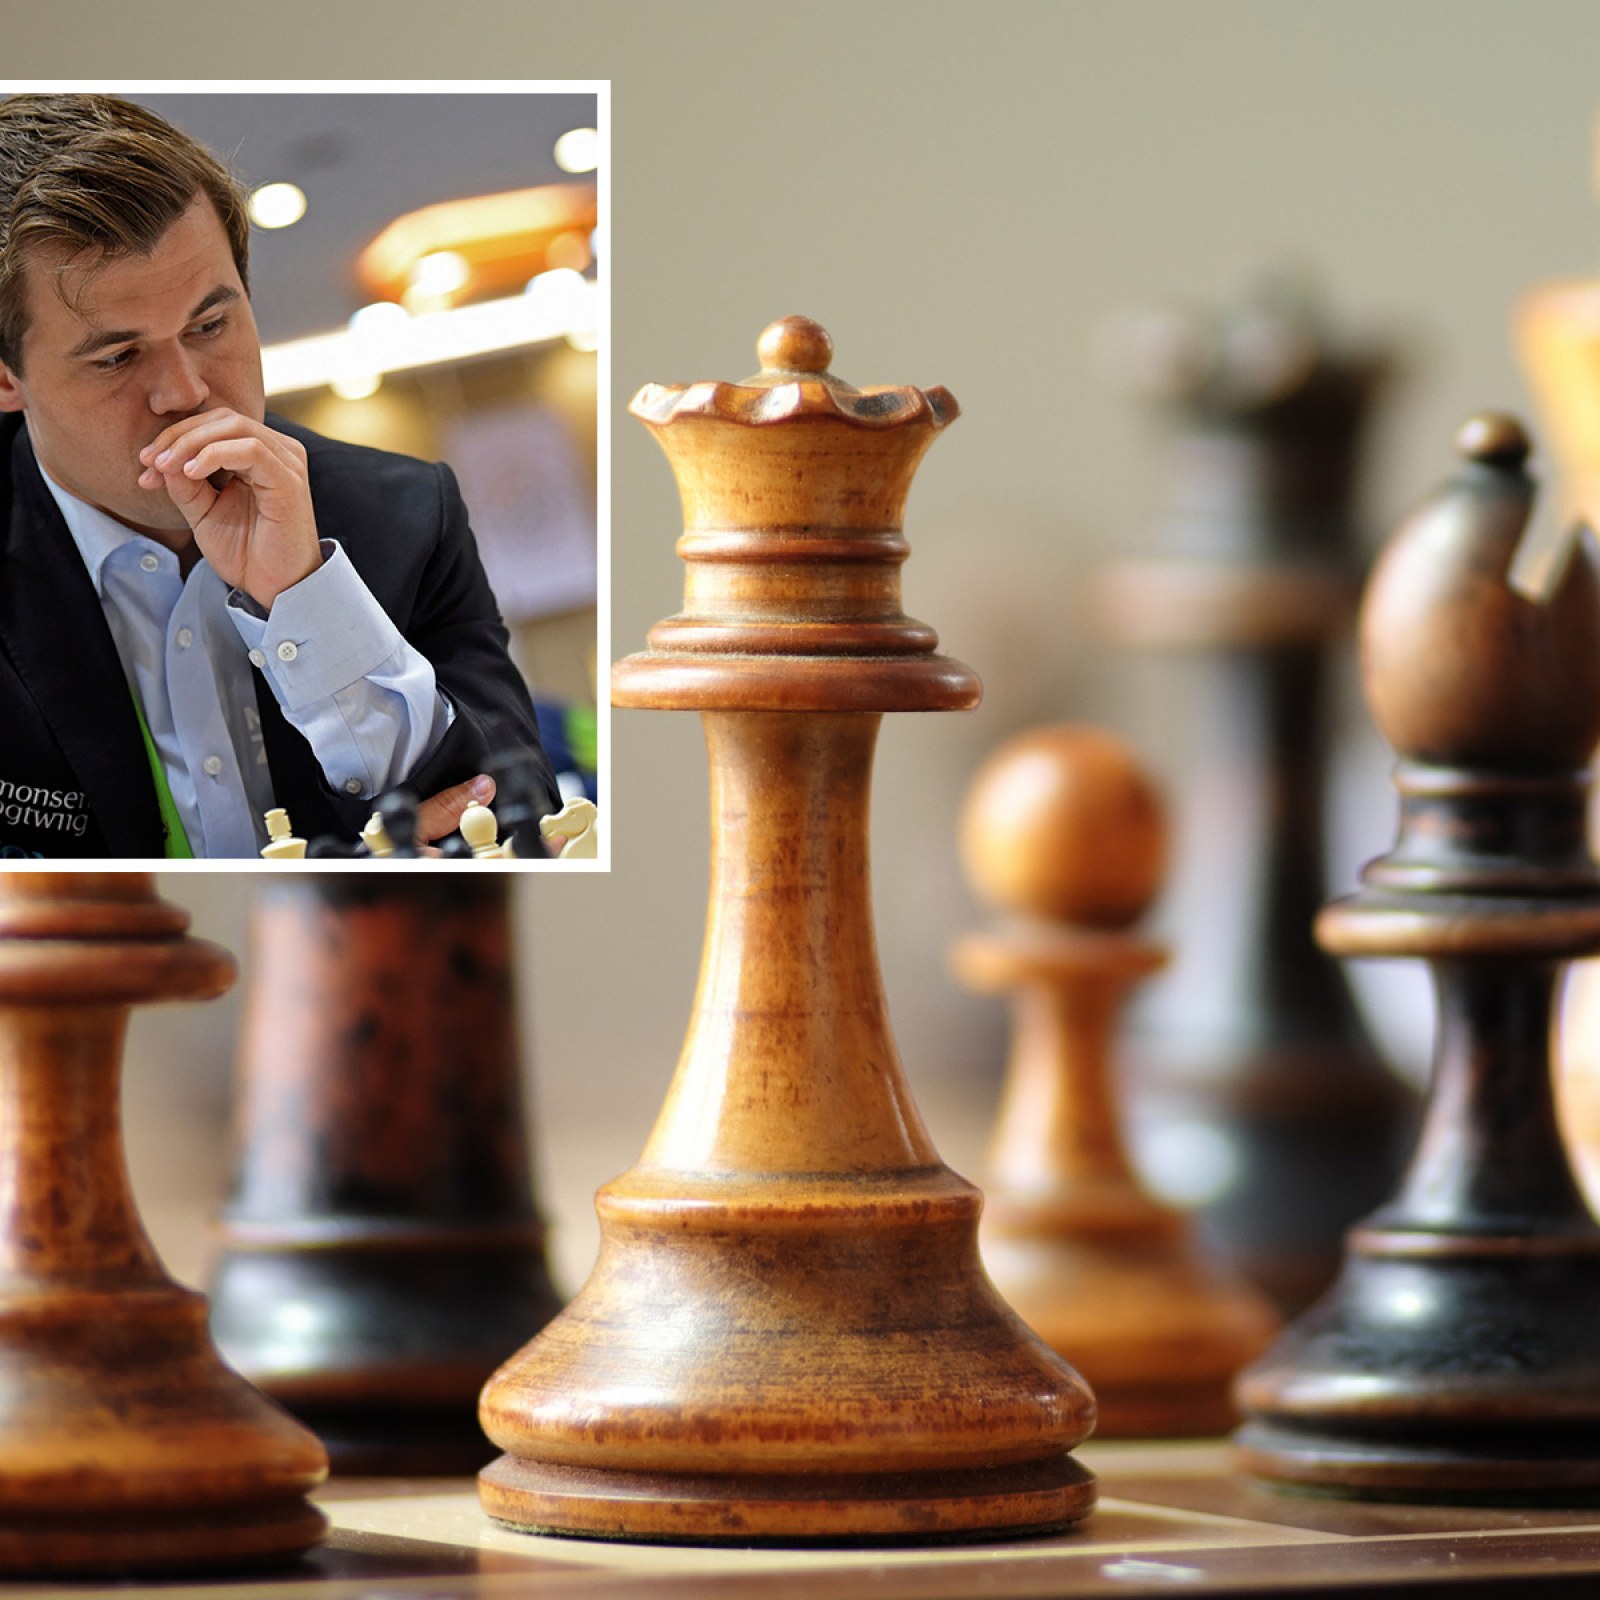 Why Magnus Carlsen resigned after first move against Hans Niemann -  Explained